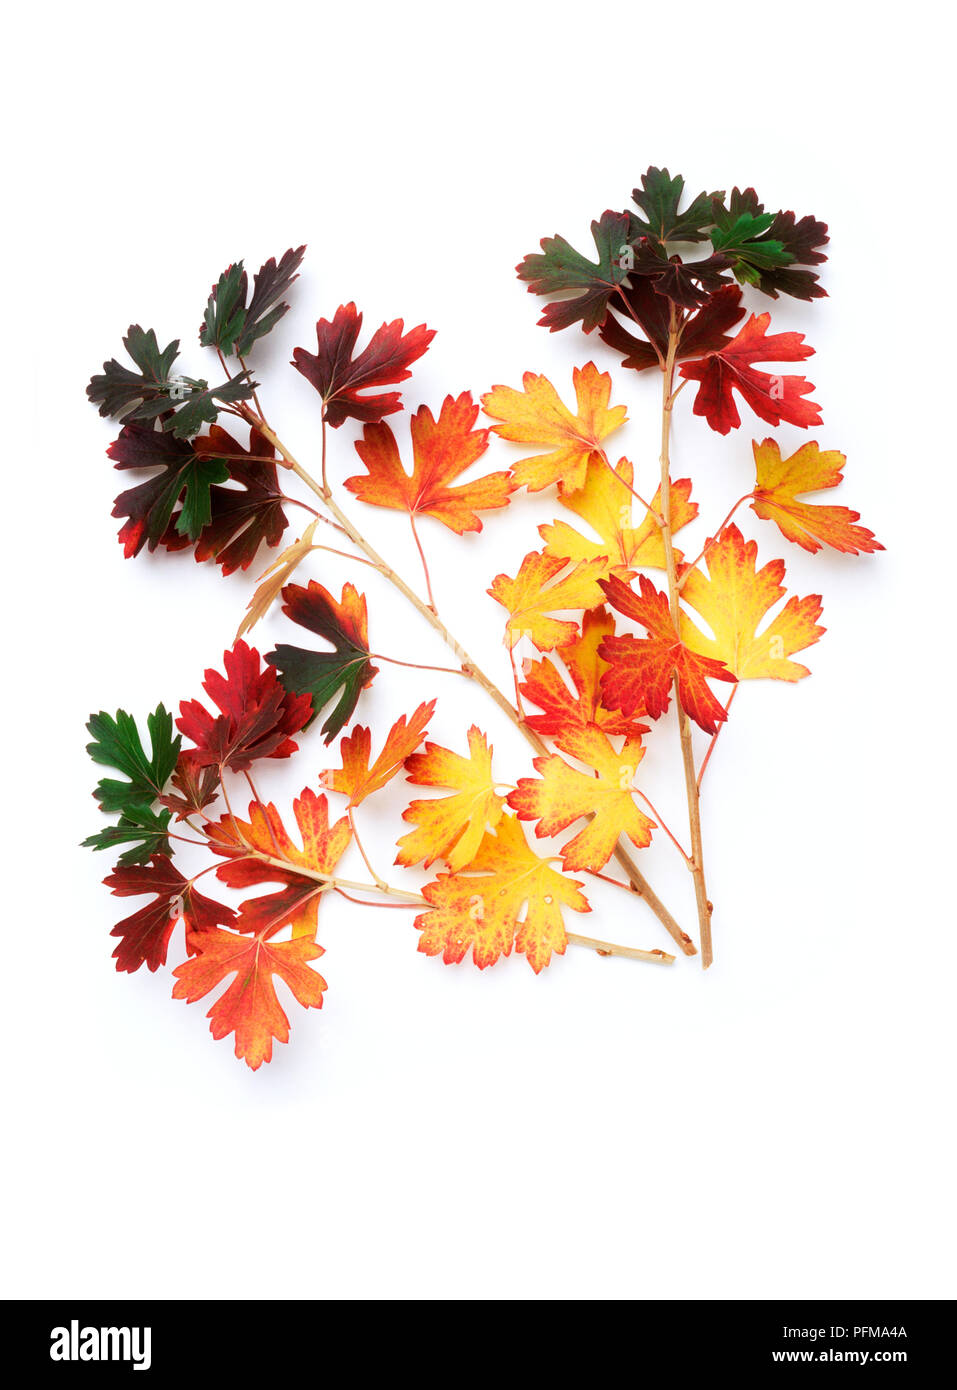 Variegated autumn leaves from Ribes odoratum (Buffalo currant) Stock Photo